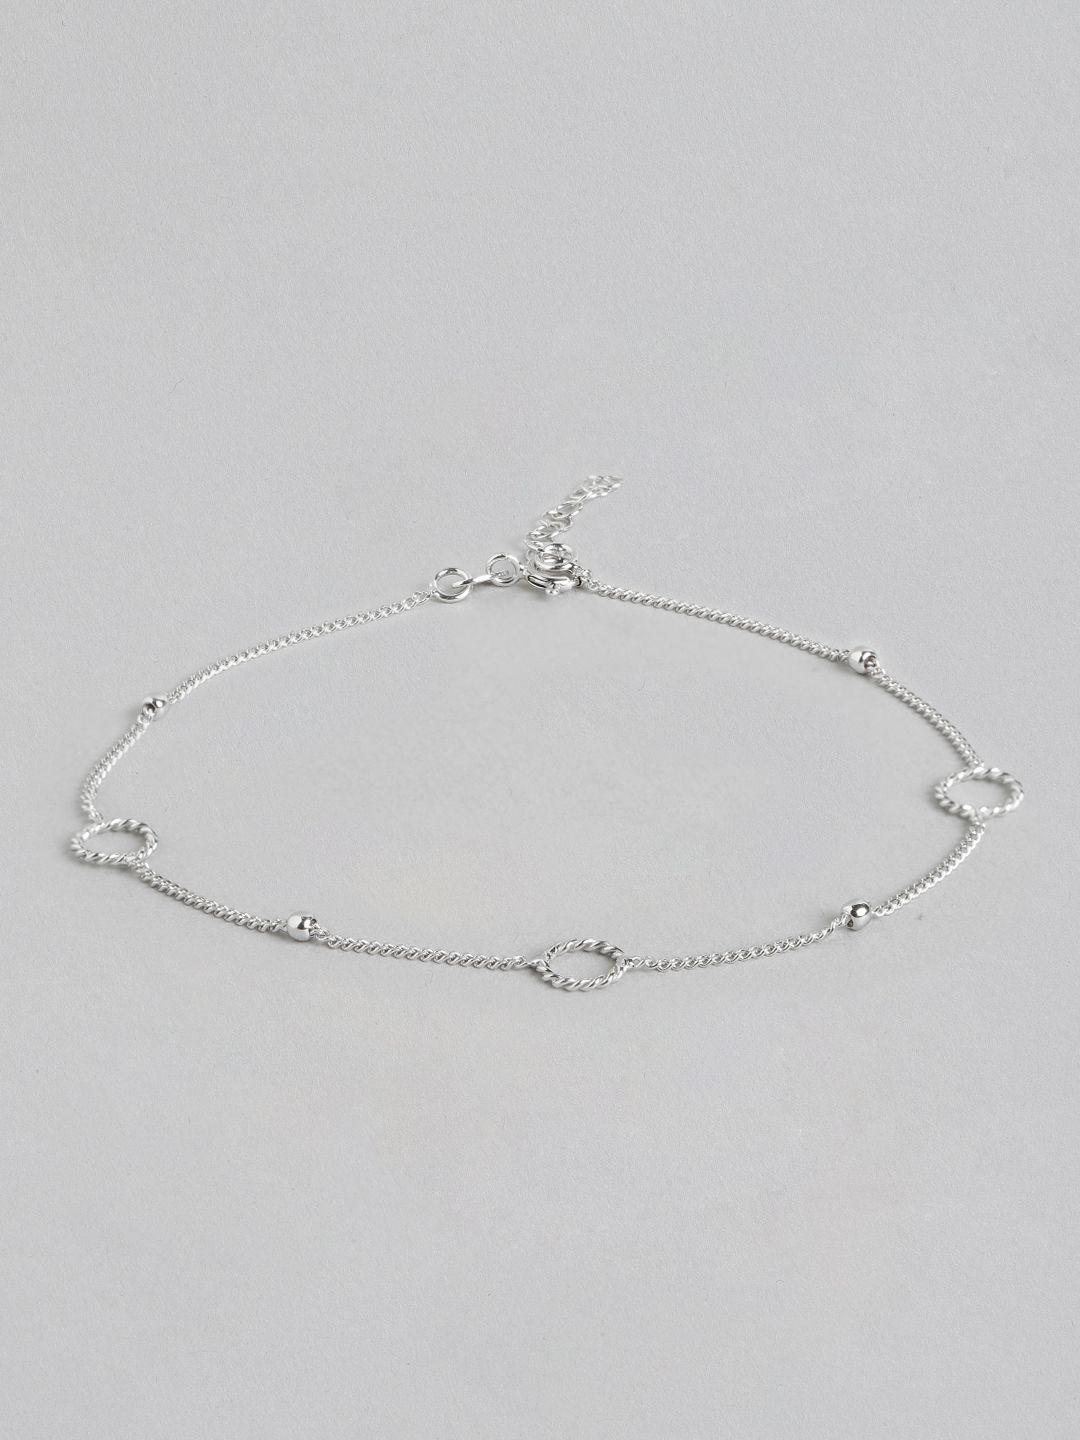 carlton-london-925-sterling-silver-rhodium-plated-adjustable-fancy-anklet